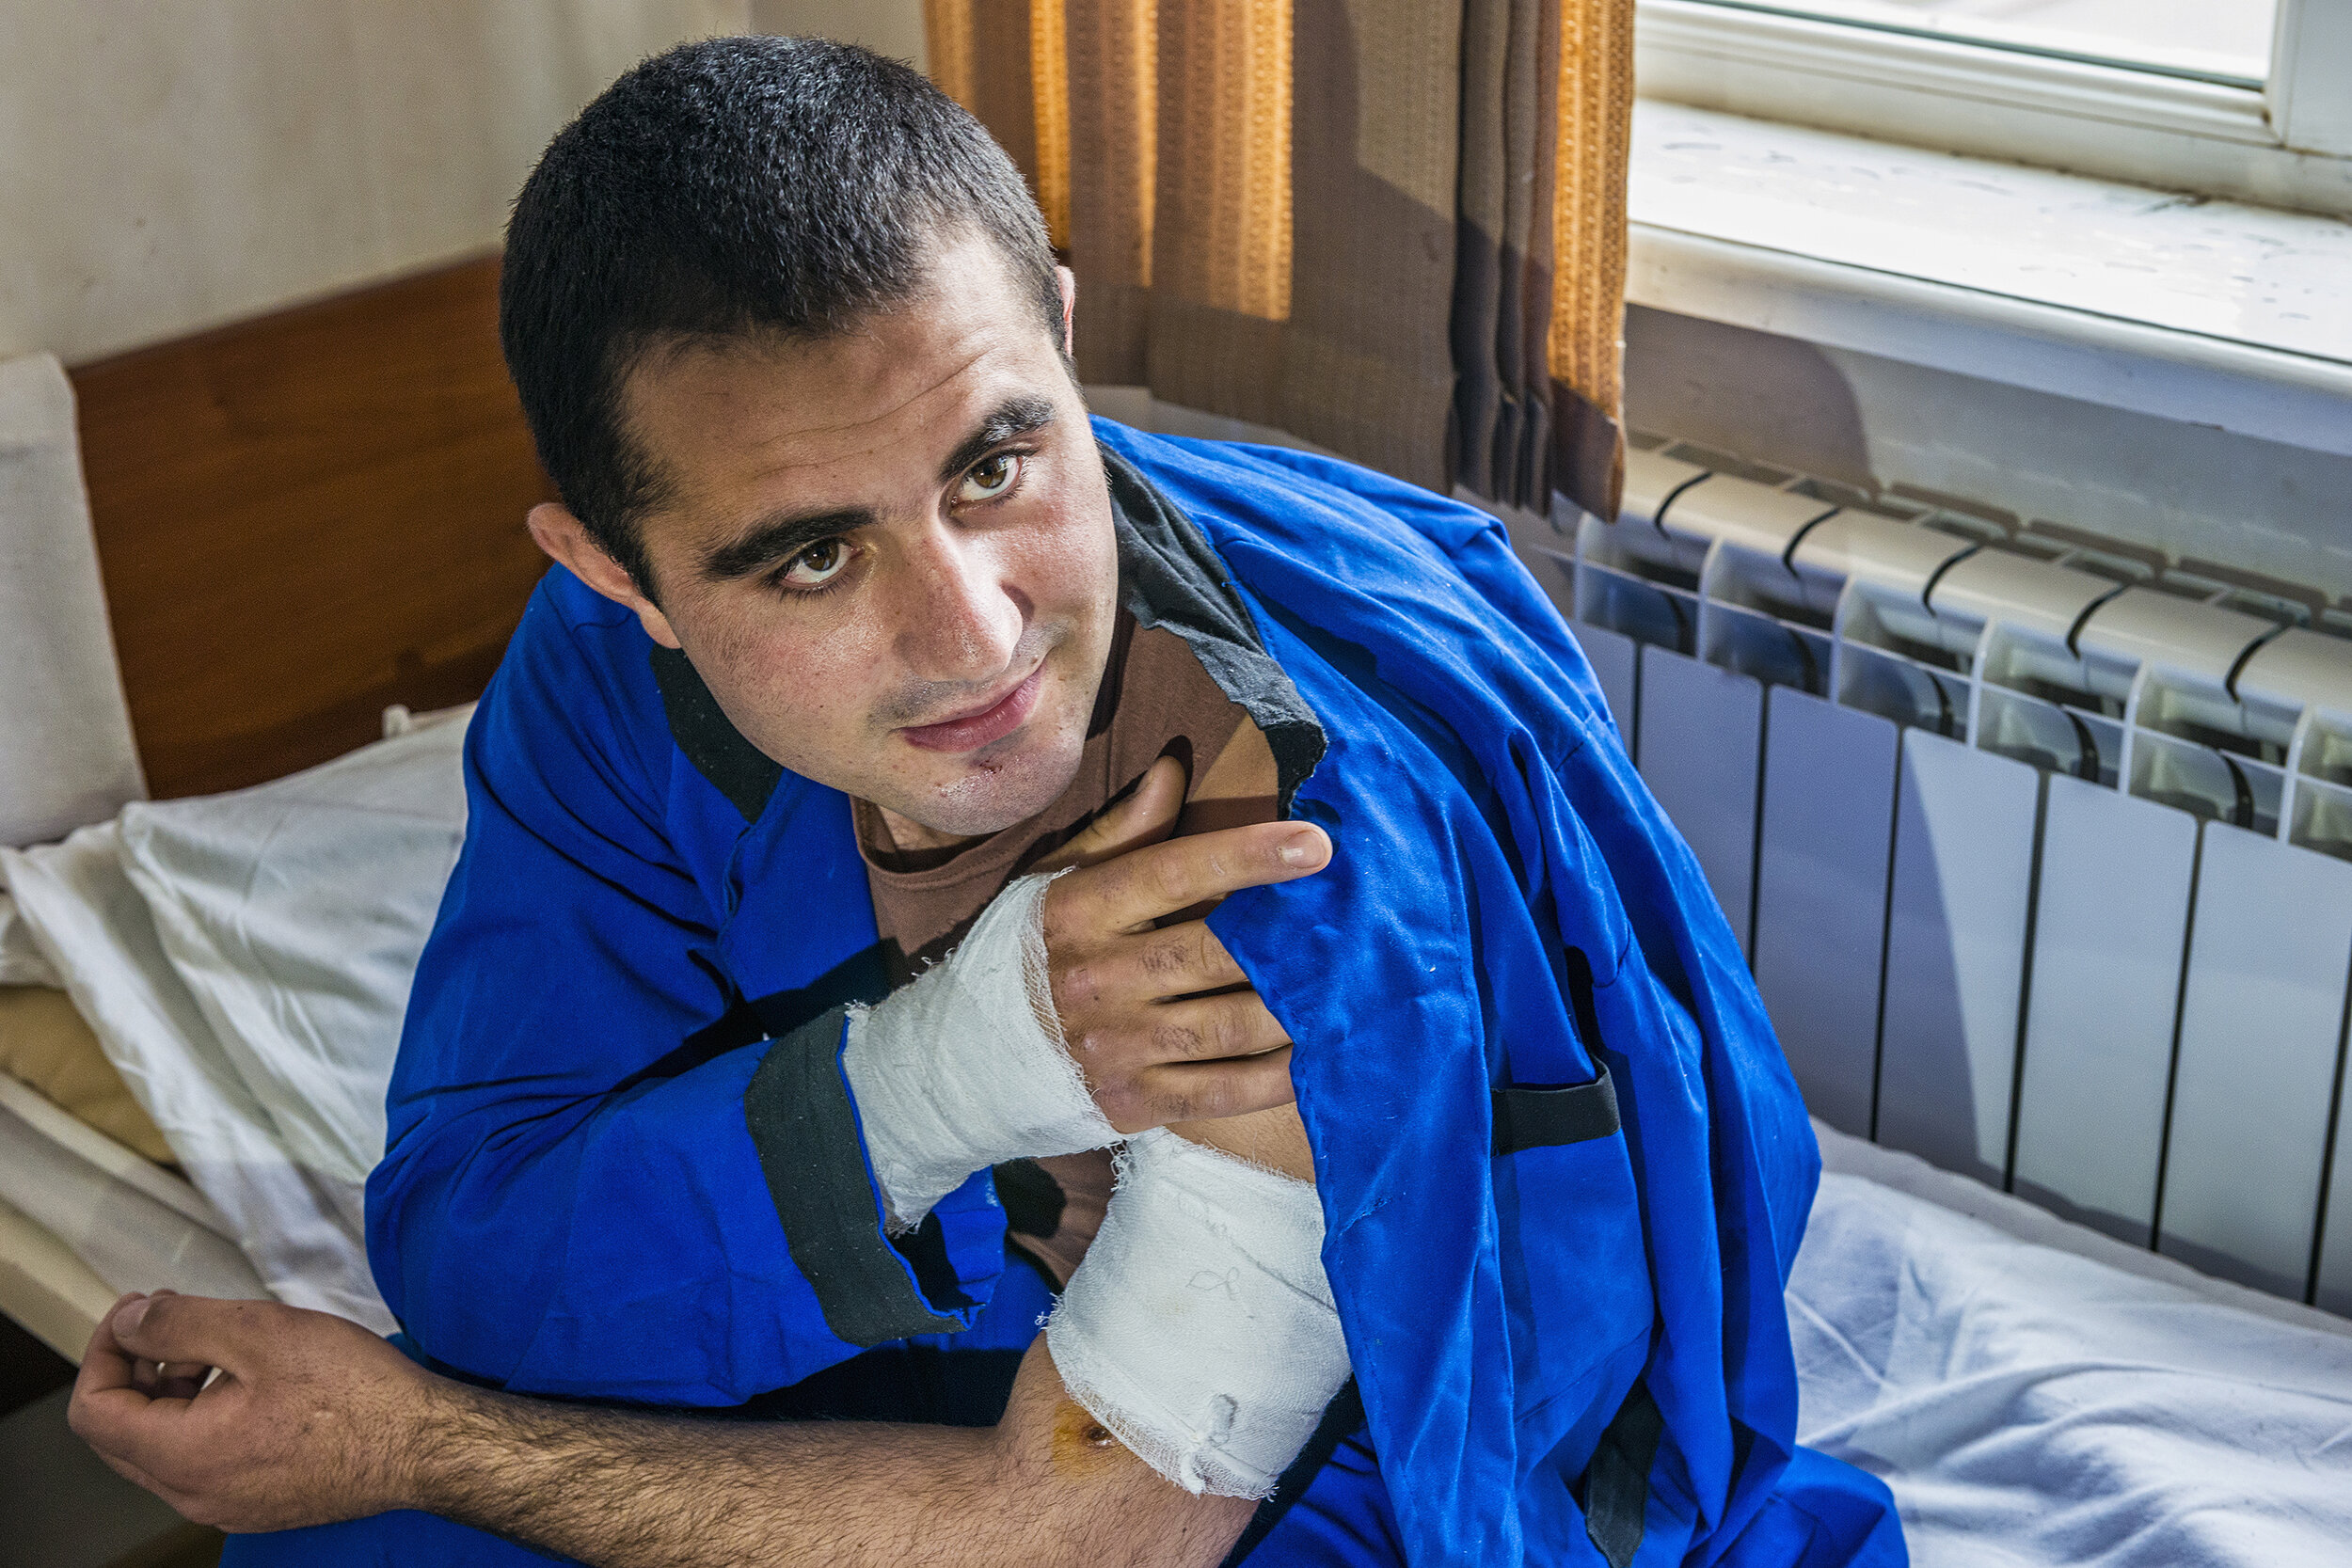  An NKR soldier peppered by shrapnel from an artillery shell during the Four-Day War shows his bandaged wounds to a TV crew at Stepanakert Central Military Hospital in Nagorno-Karabakh.  The hospital ward housed several soldiers wounded by artillery,